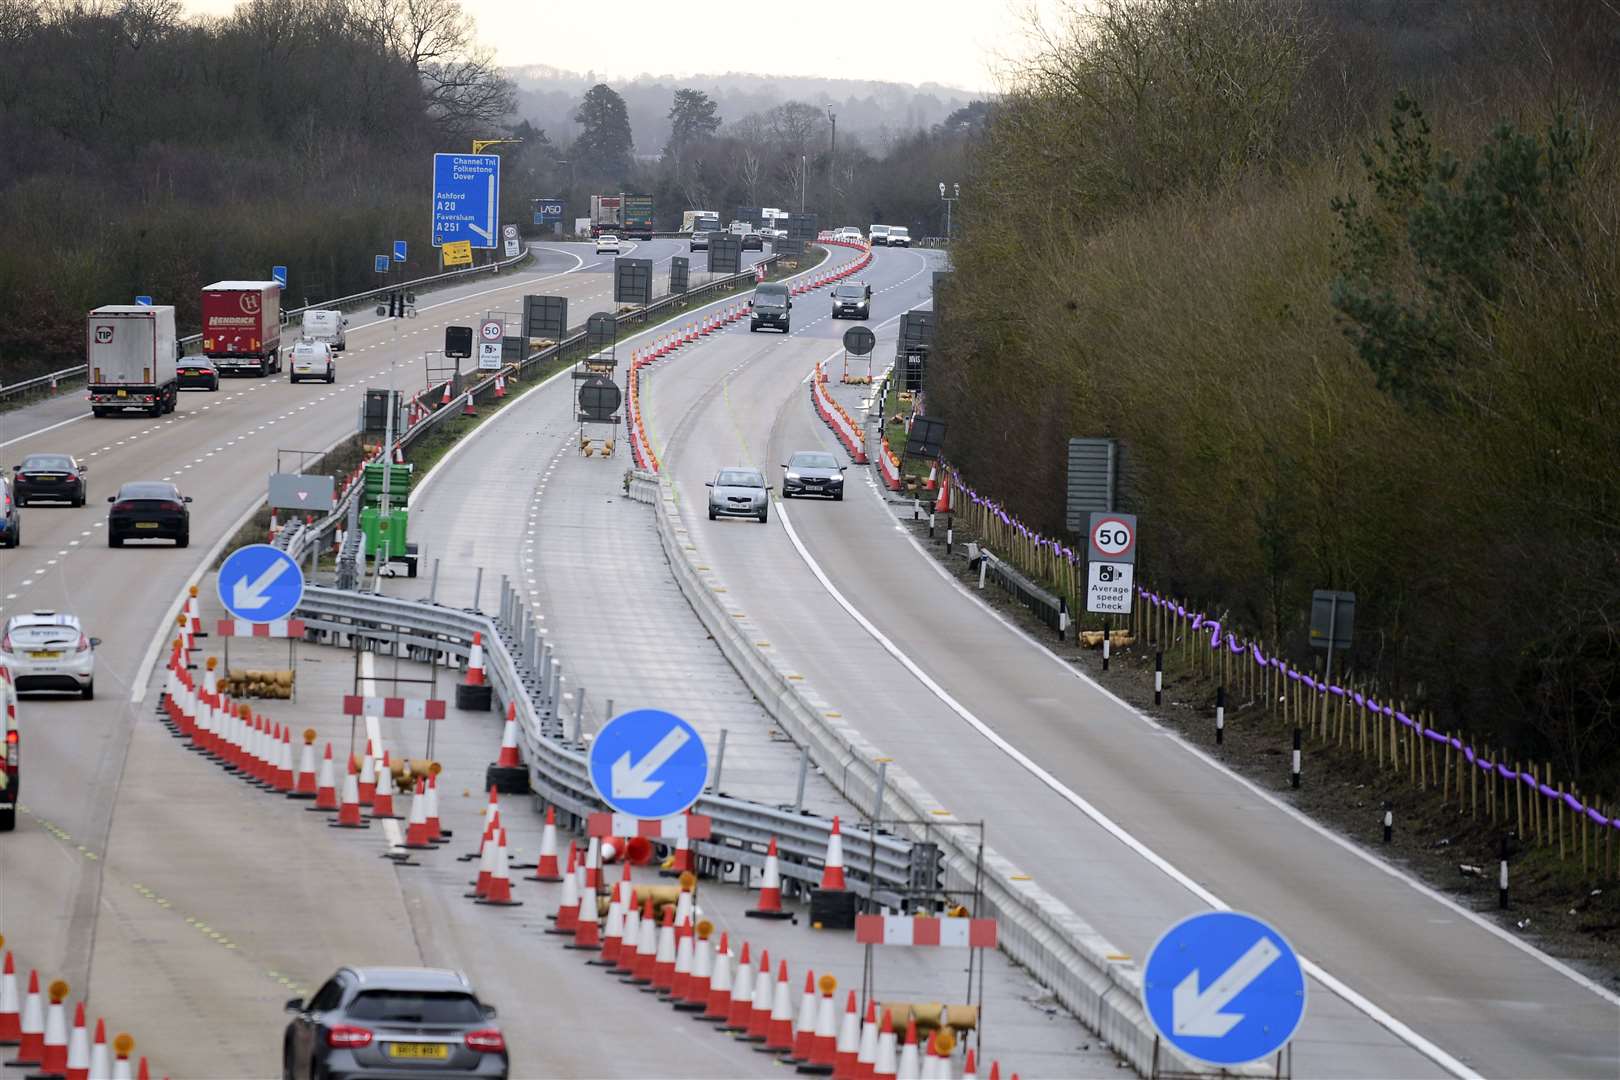 Operation Brock could be used if Kent's roads get too congested